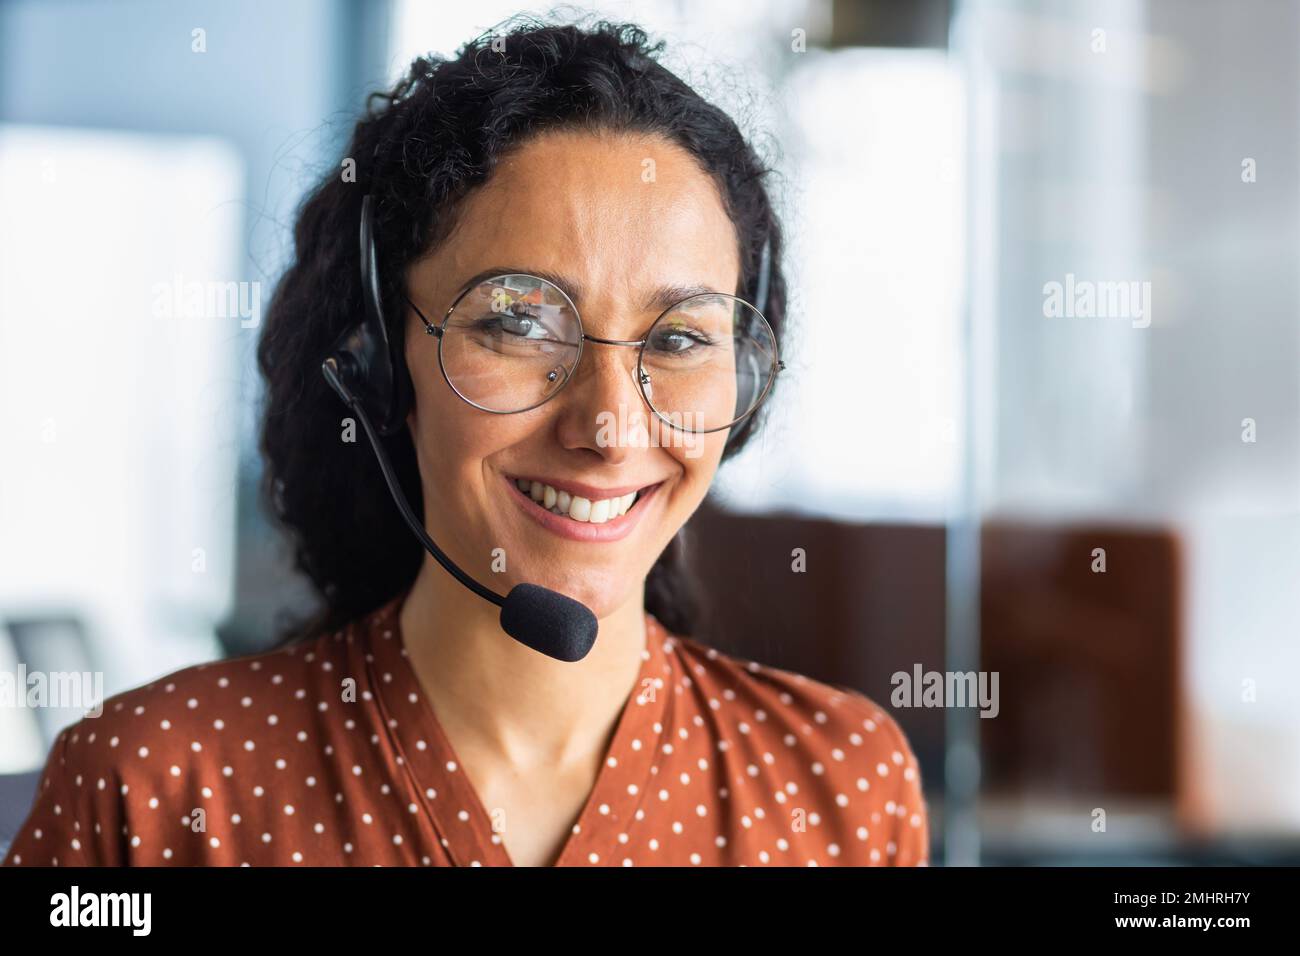 Close-up photo. Portrait of a young beautiful Latin American woman in a headset. Call center, service operator, hospital reception, support and assistance line. He looks at the camera, smiles. Stock Photo